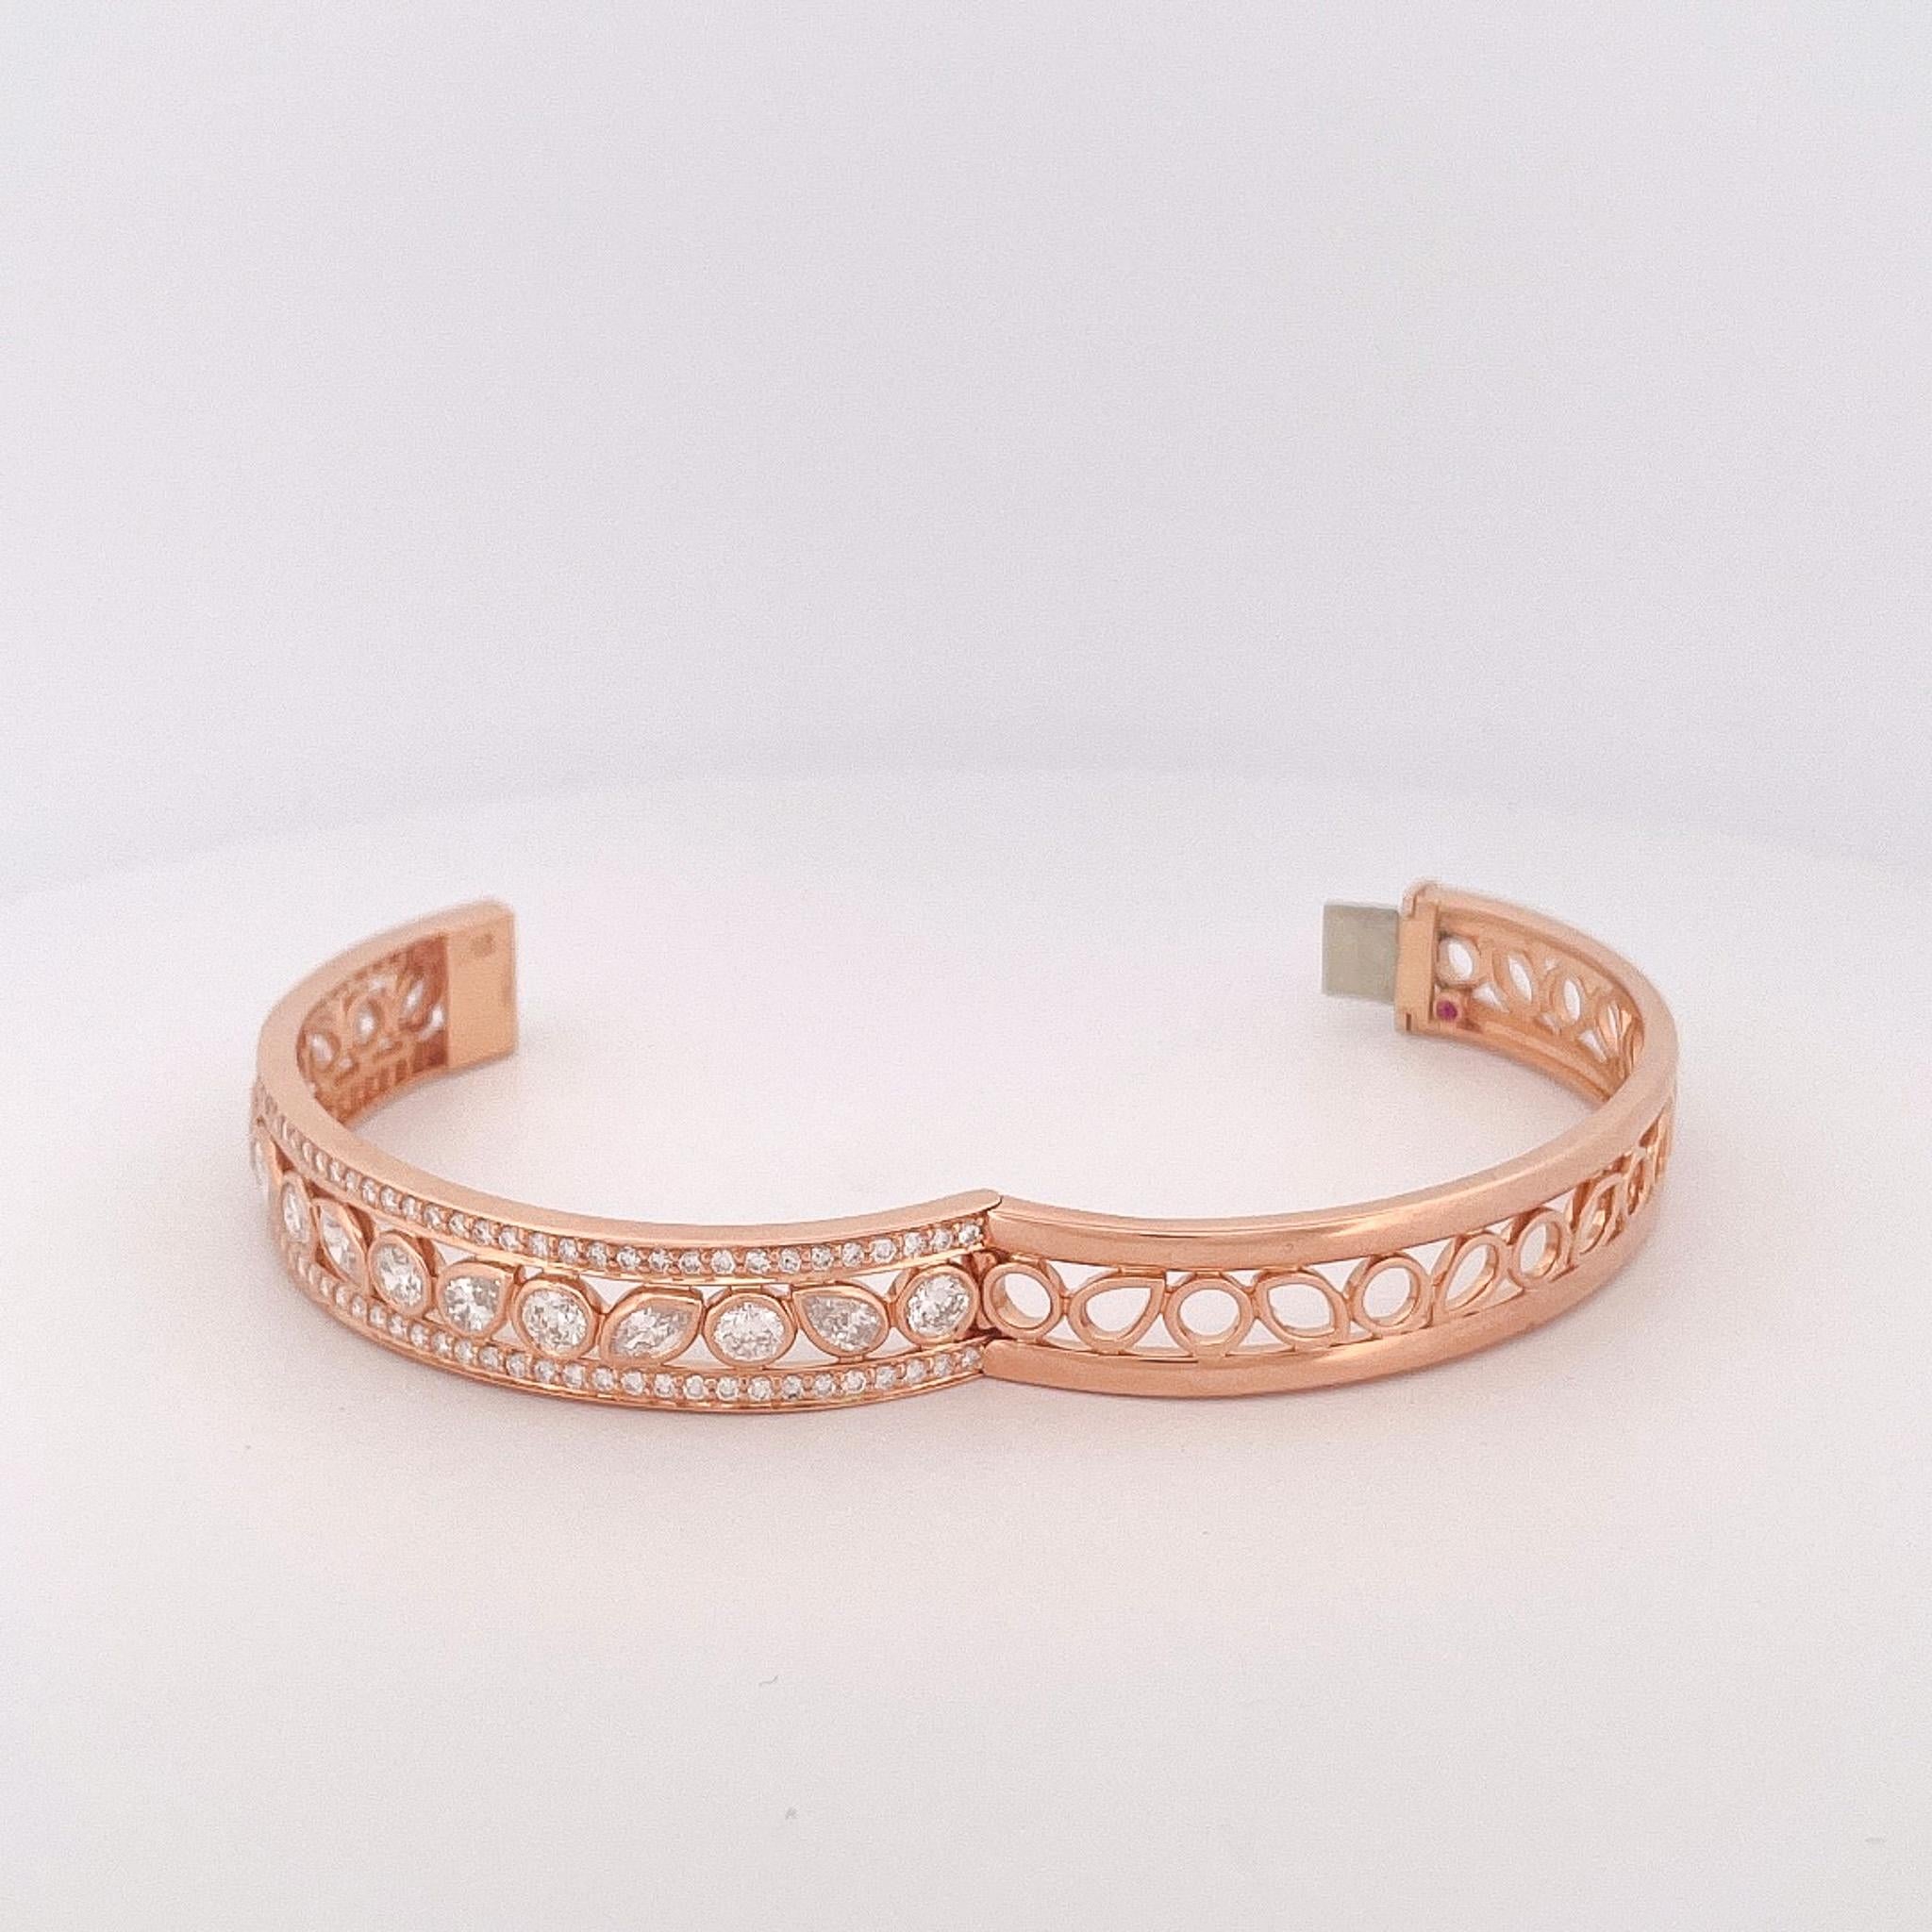 From designer Roberto Coin’s Cento Dolce Collection, 18 karat rose gold diamond bangle. This bangle is crafted with an assortment of a round brilliant cut, marquise shape, pear shape, and round cut diamonds with a total combined weight of 6.00